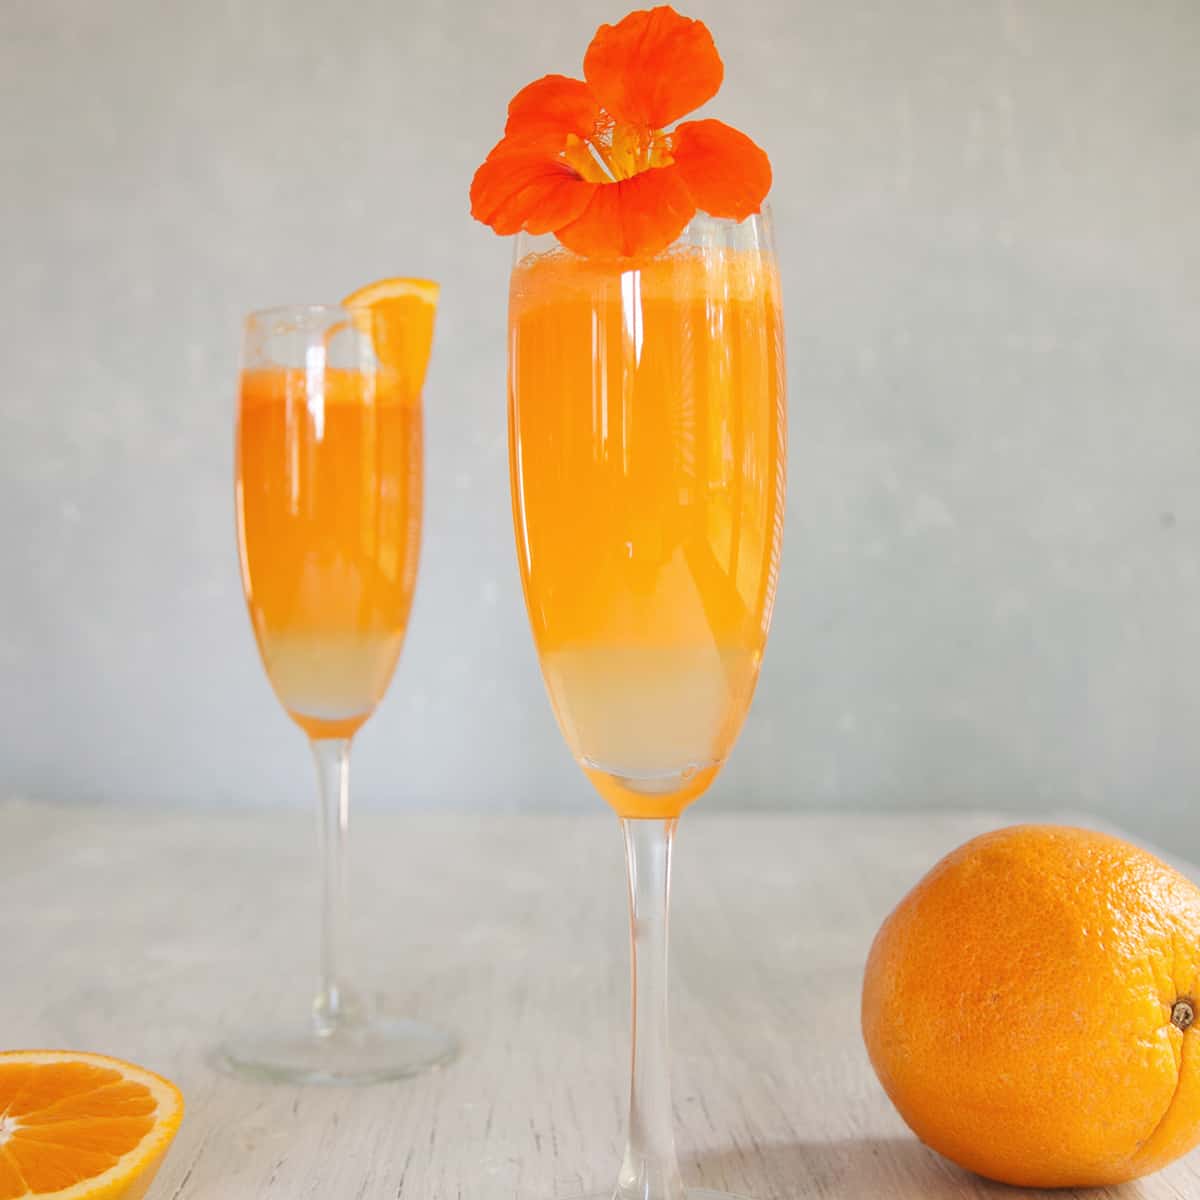 Two sprits prosecco cocktail s on a plain backdrop with a few oranges